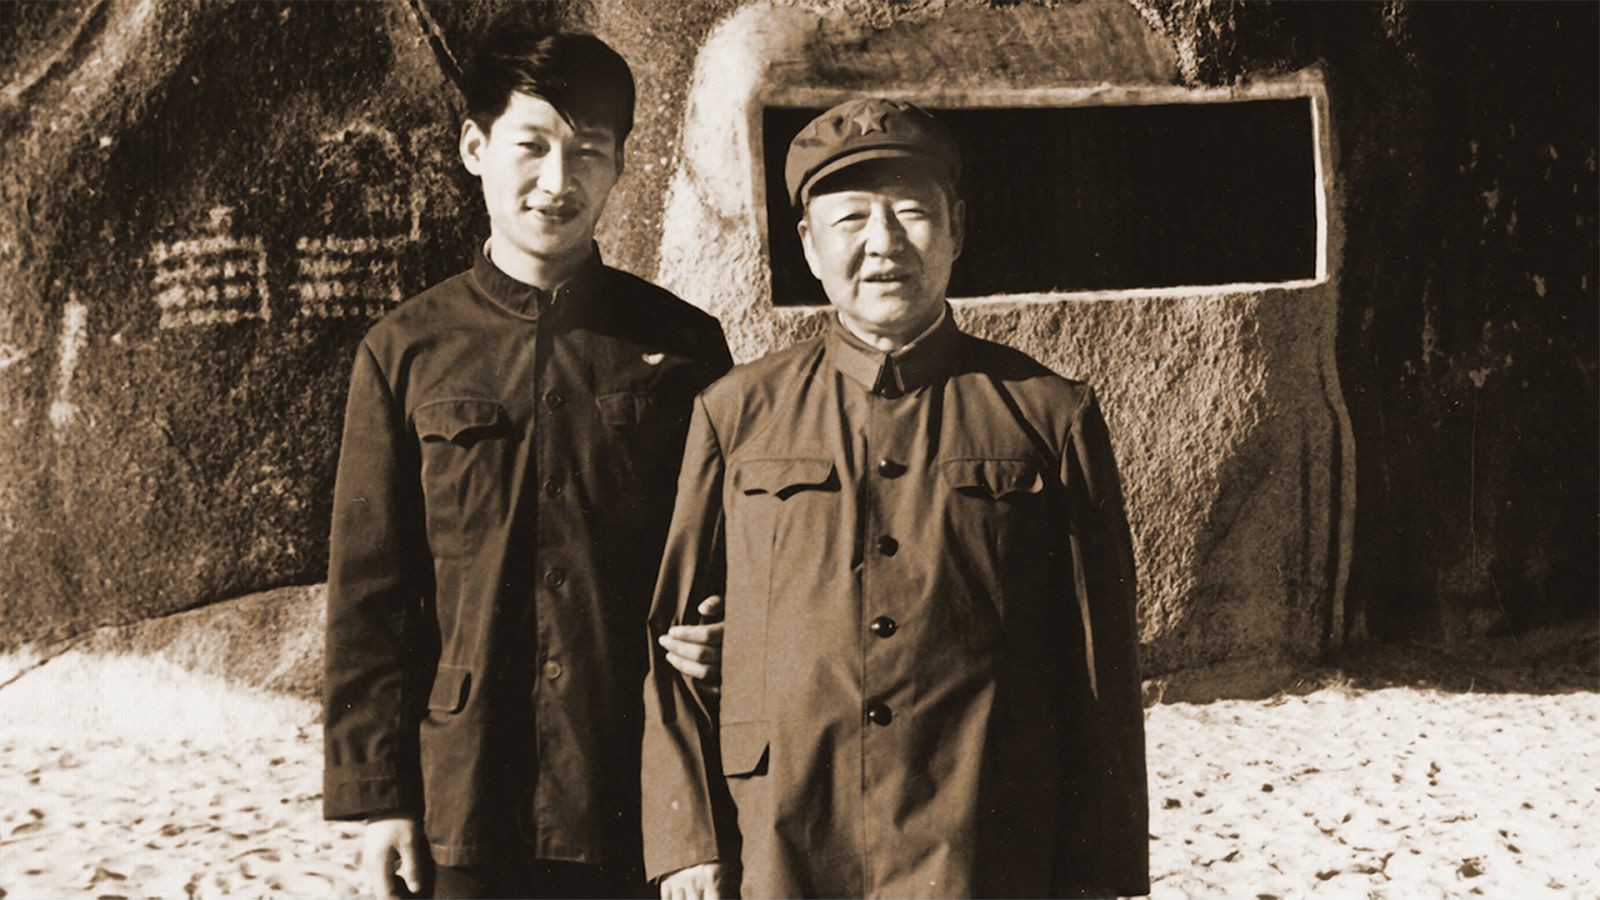 Xi Jinping's father's influence on his son